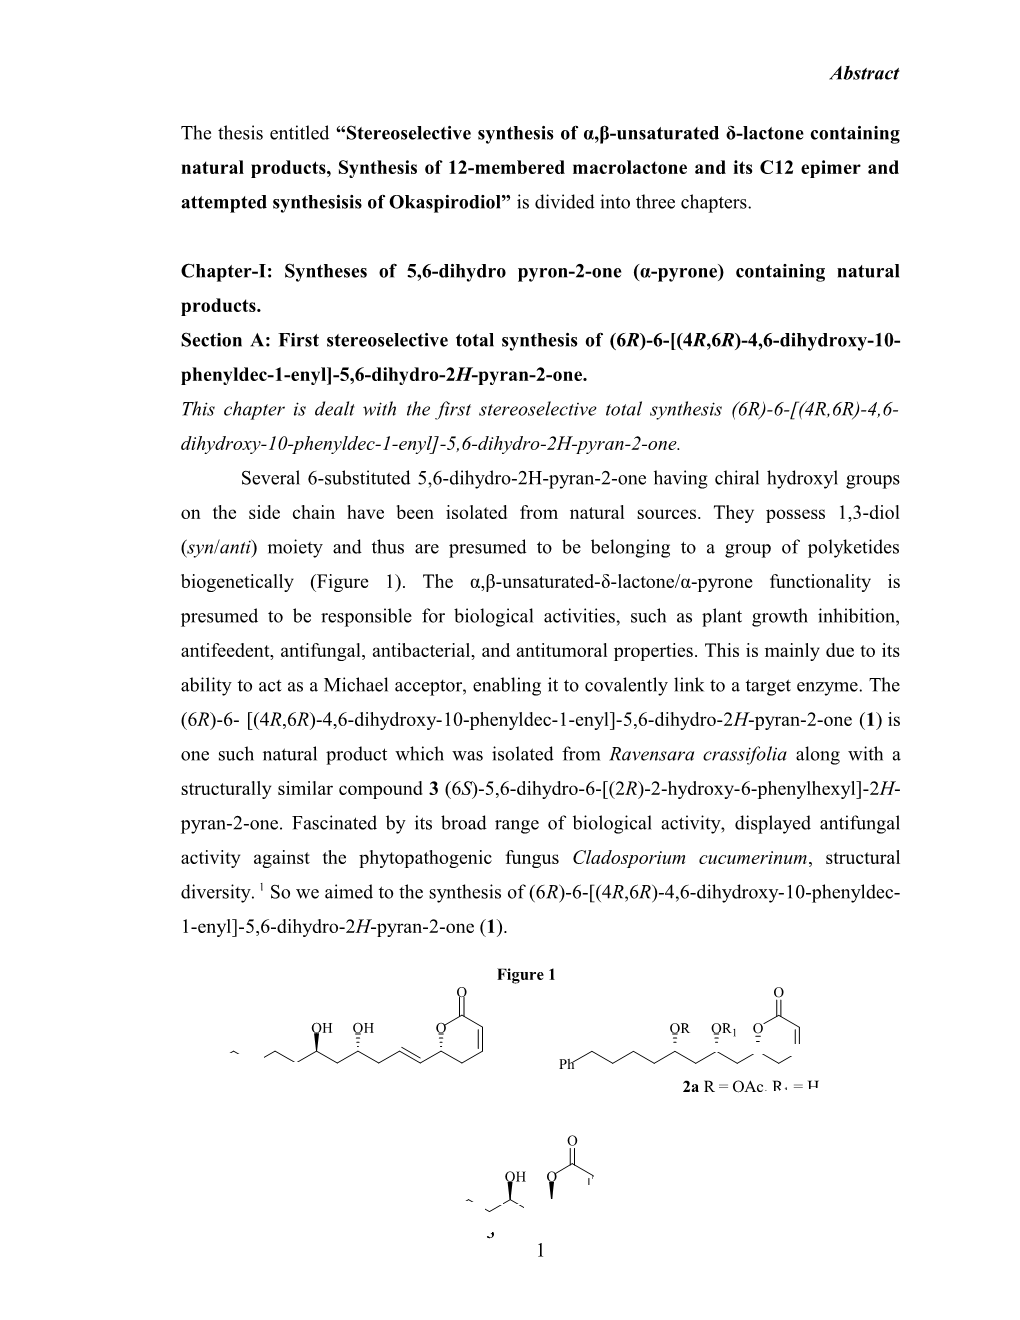 The Thesis Entitled Synthesis of Macrosphelides I and G; Total Synthesis of Patulolide